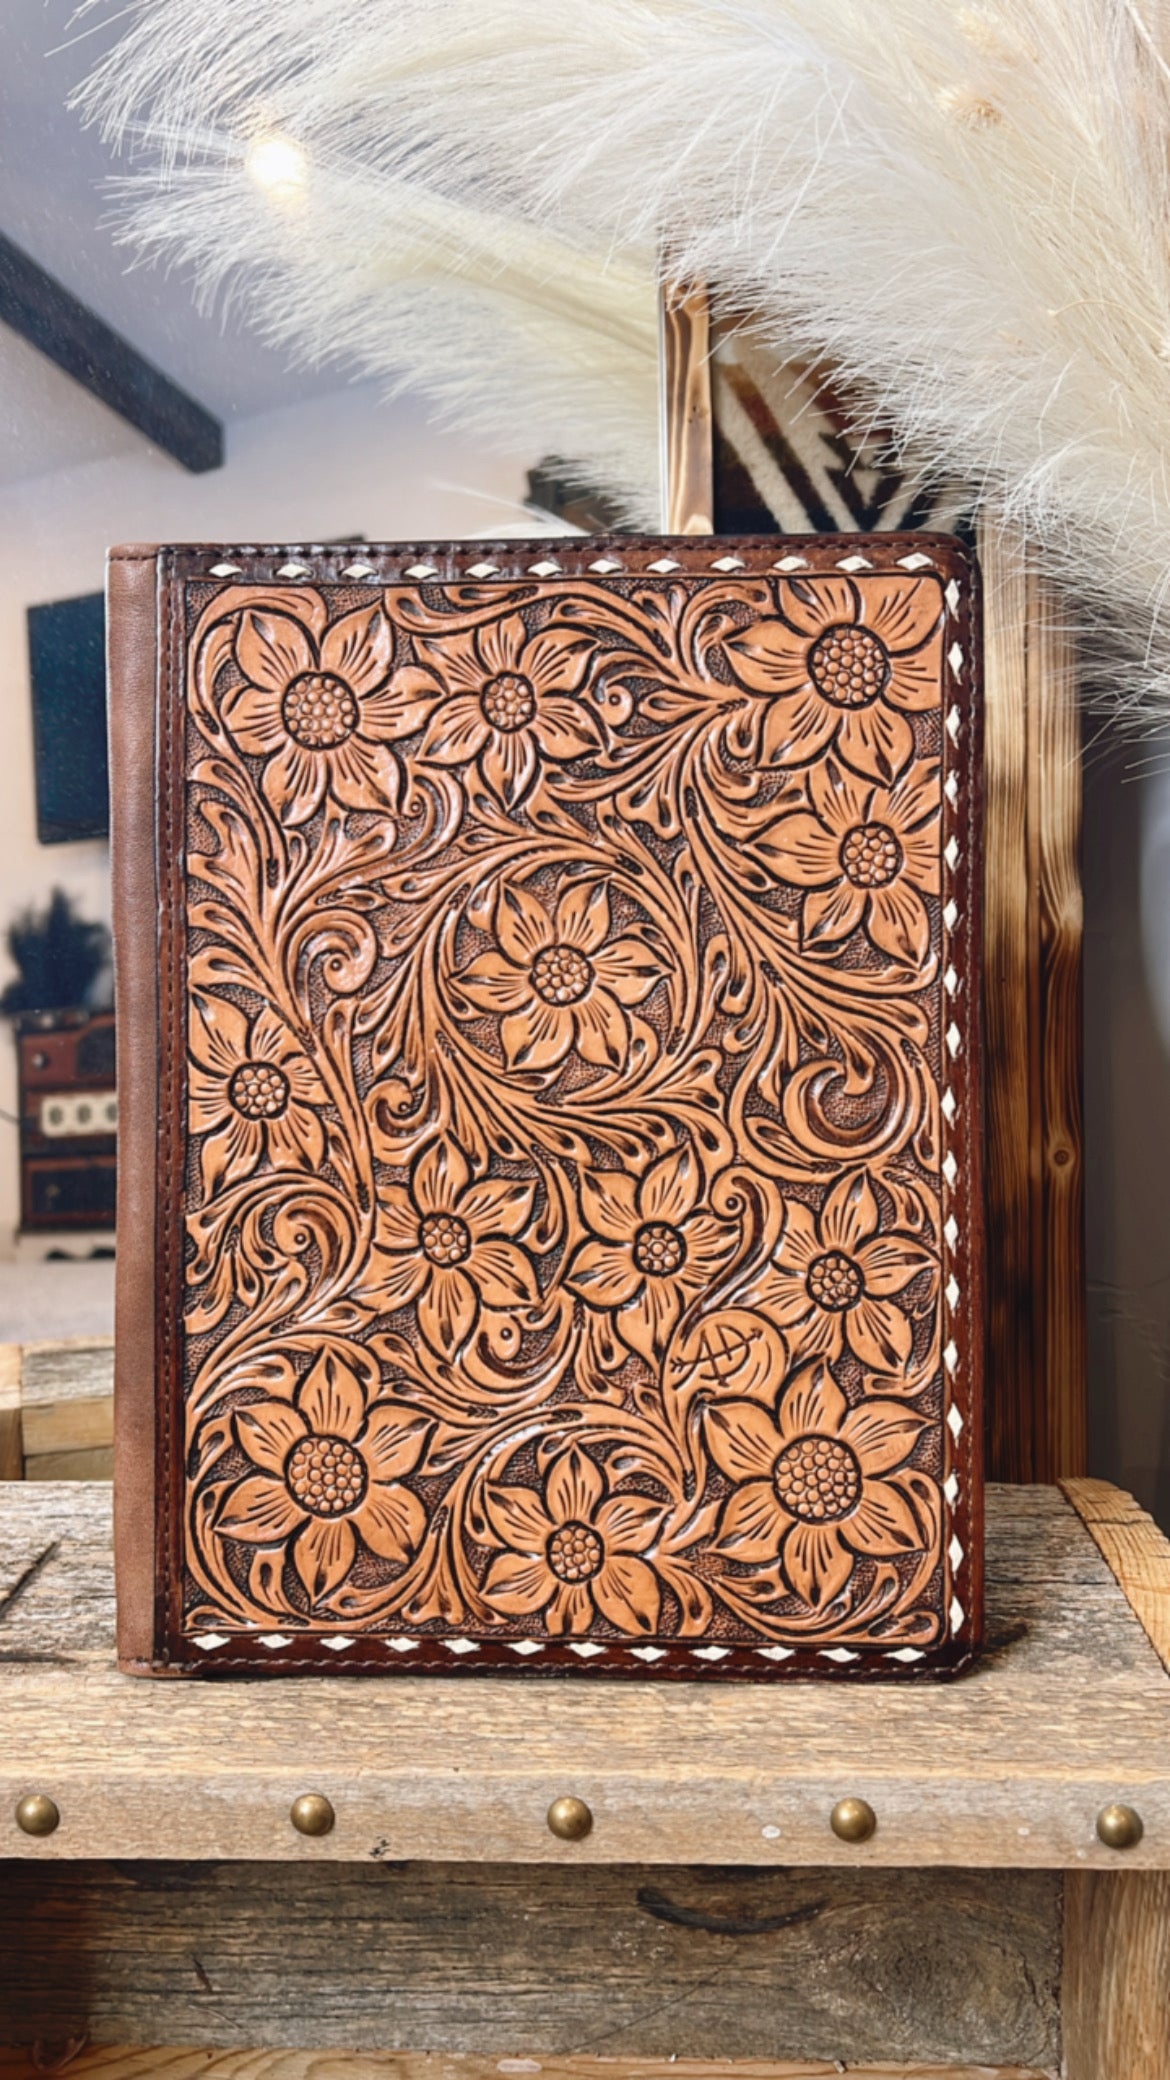 The Sale Yard Legal Notebook Cover - Tooled